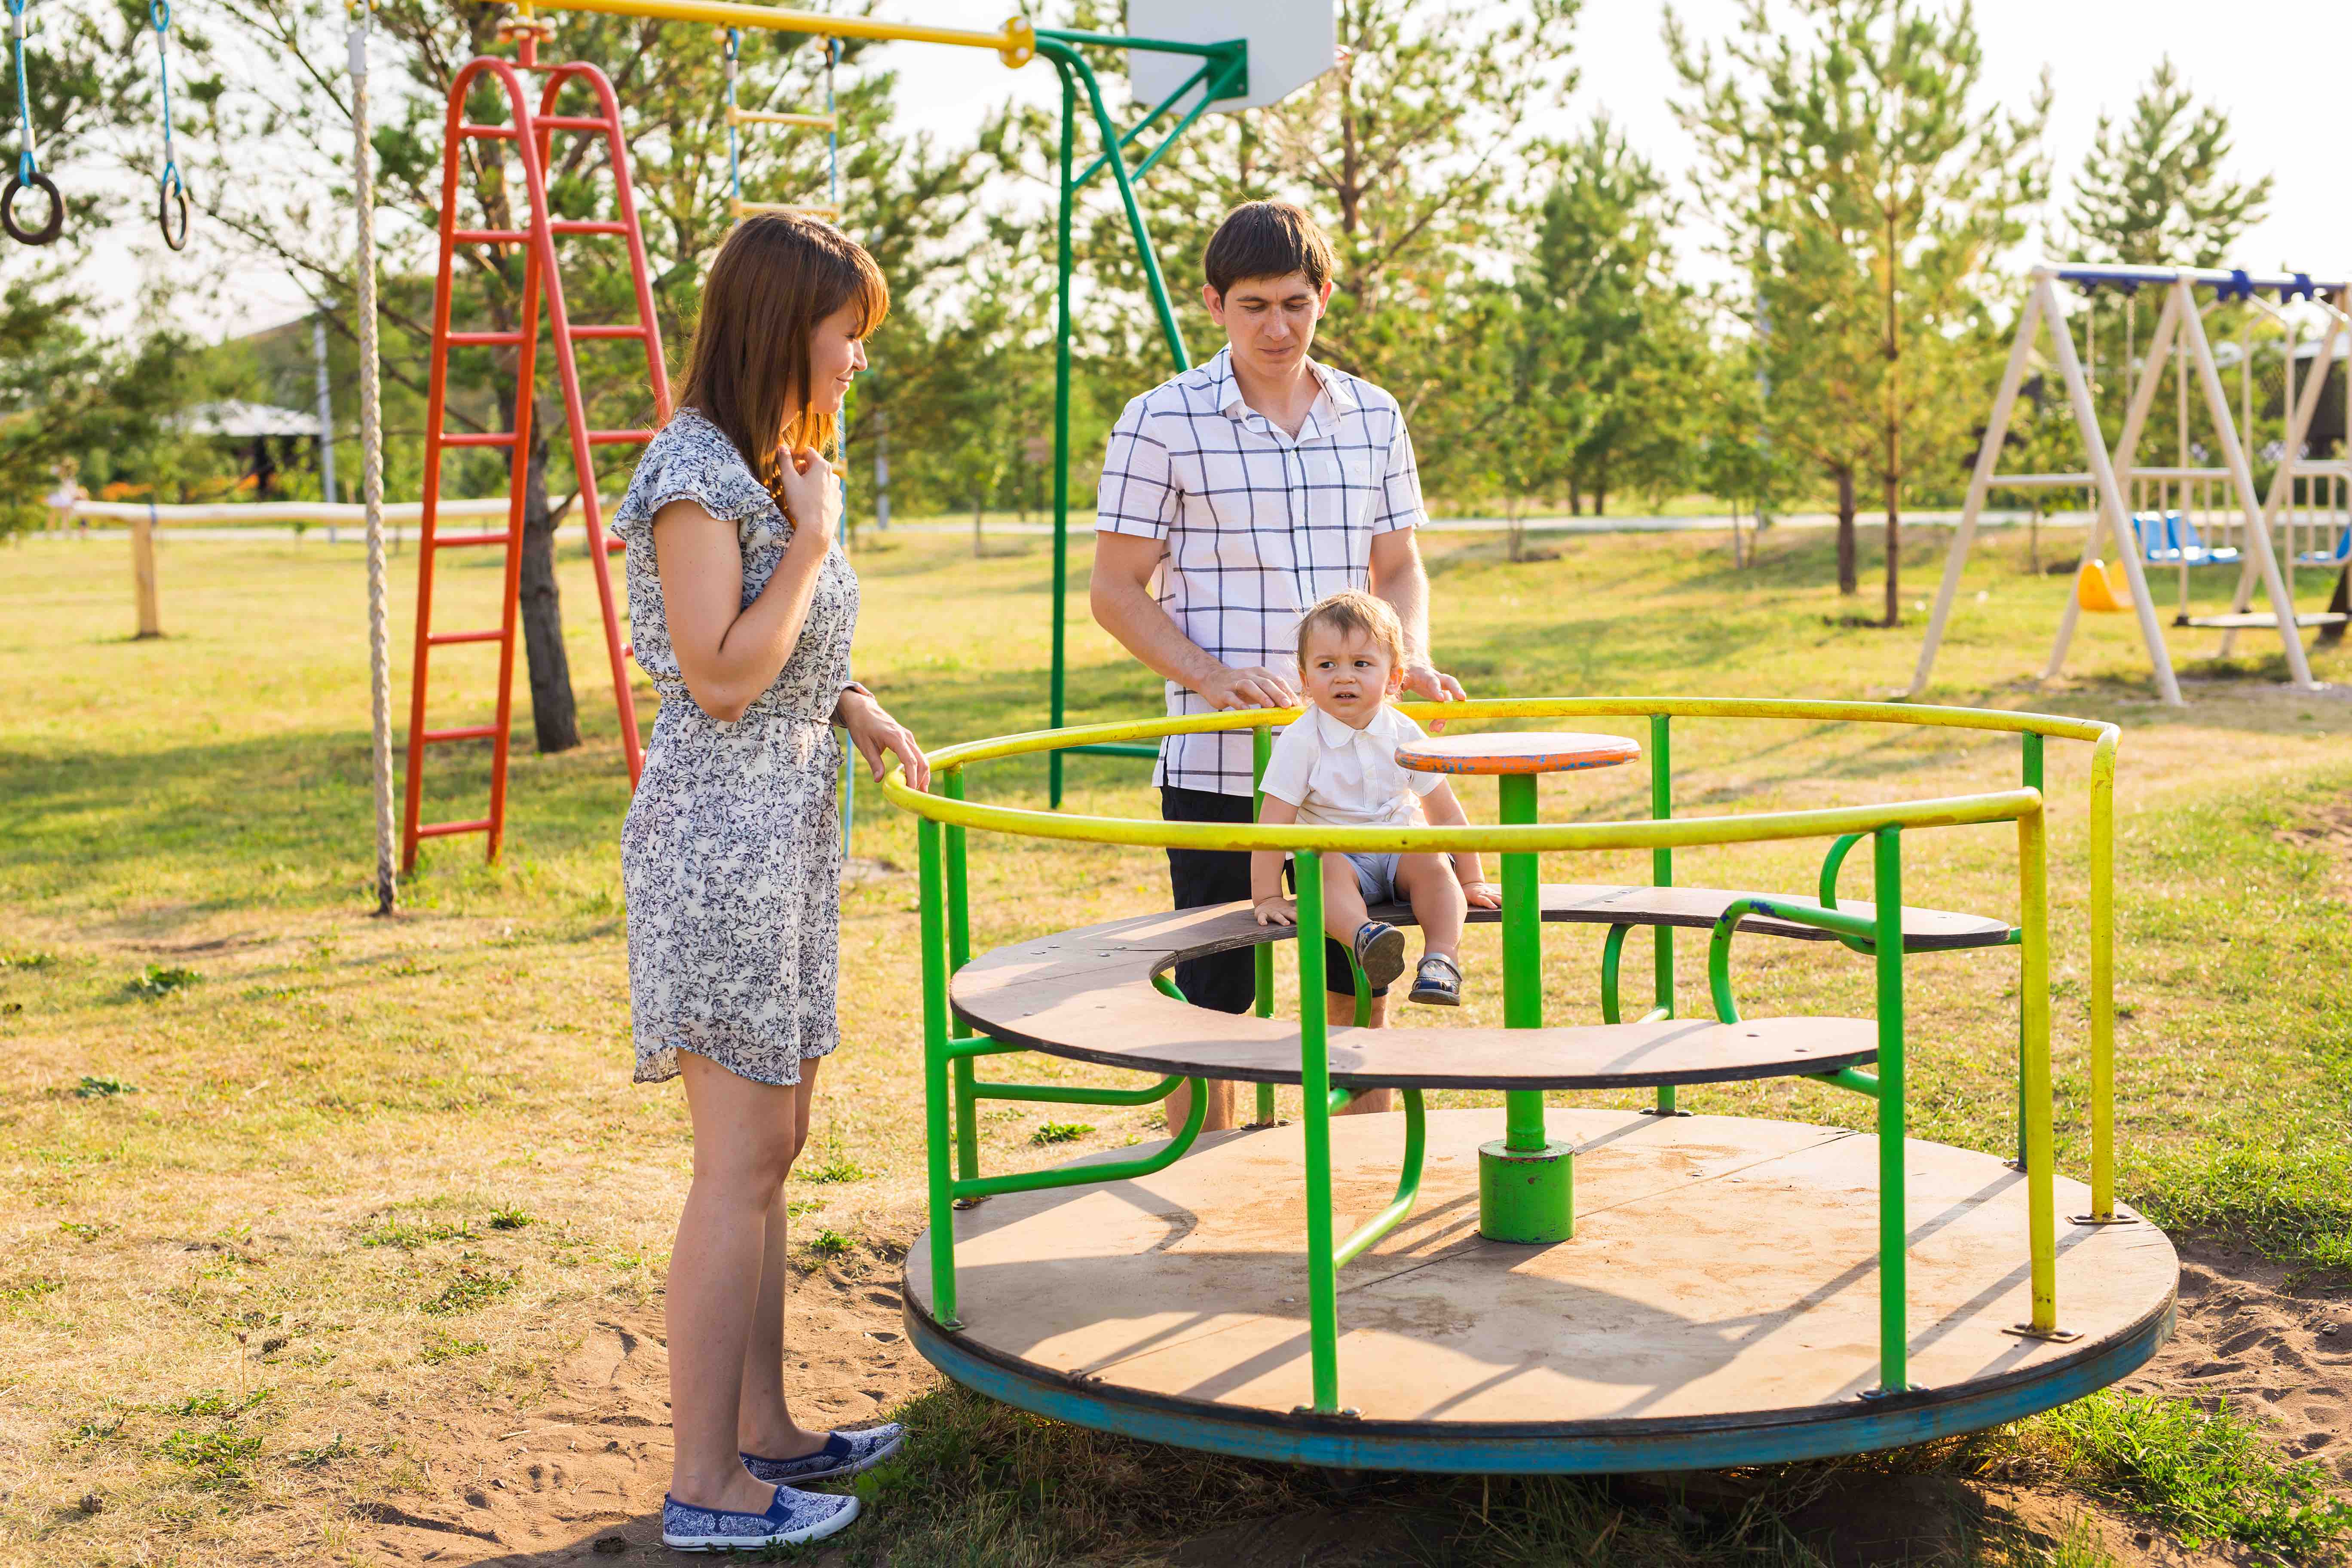 Parents at park with toddler